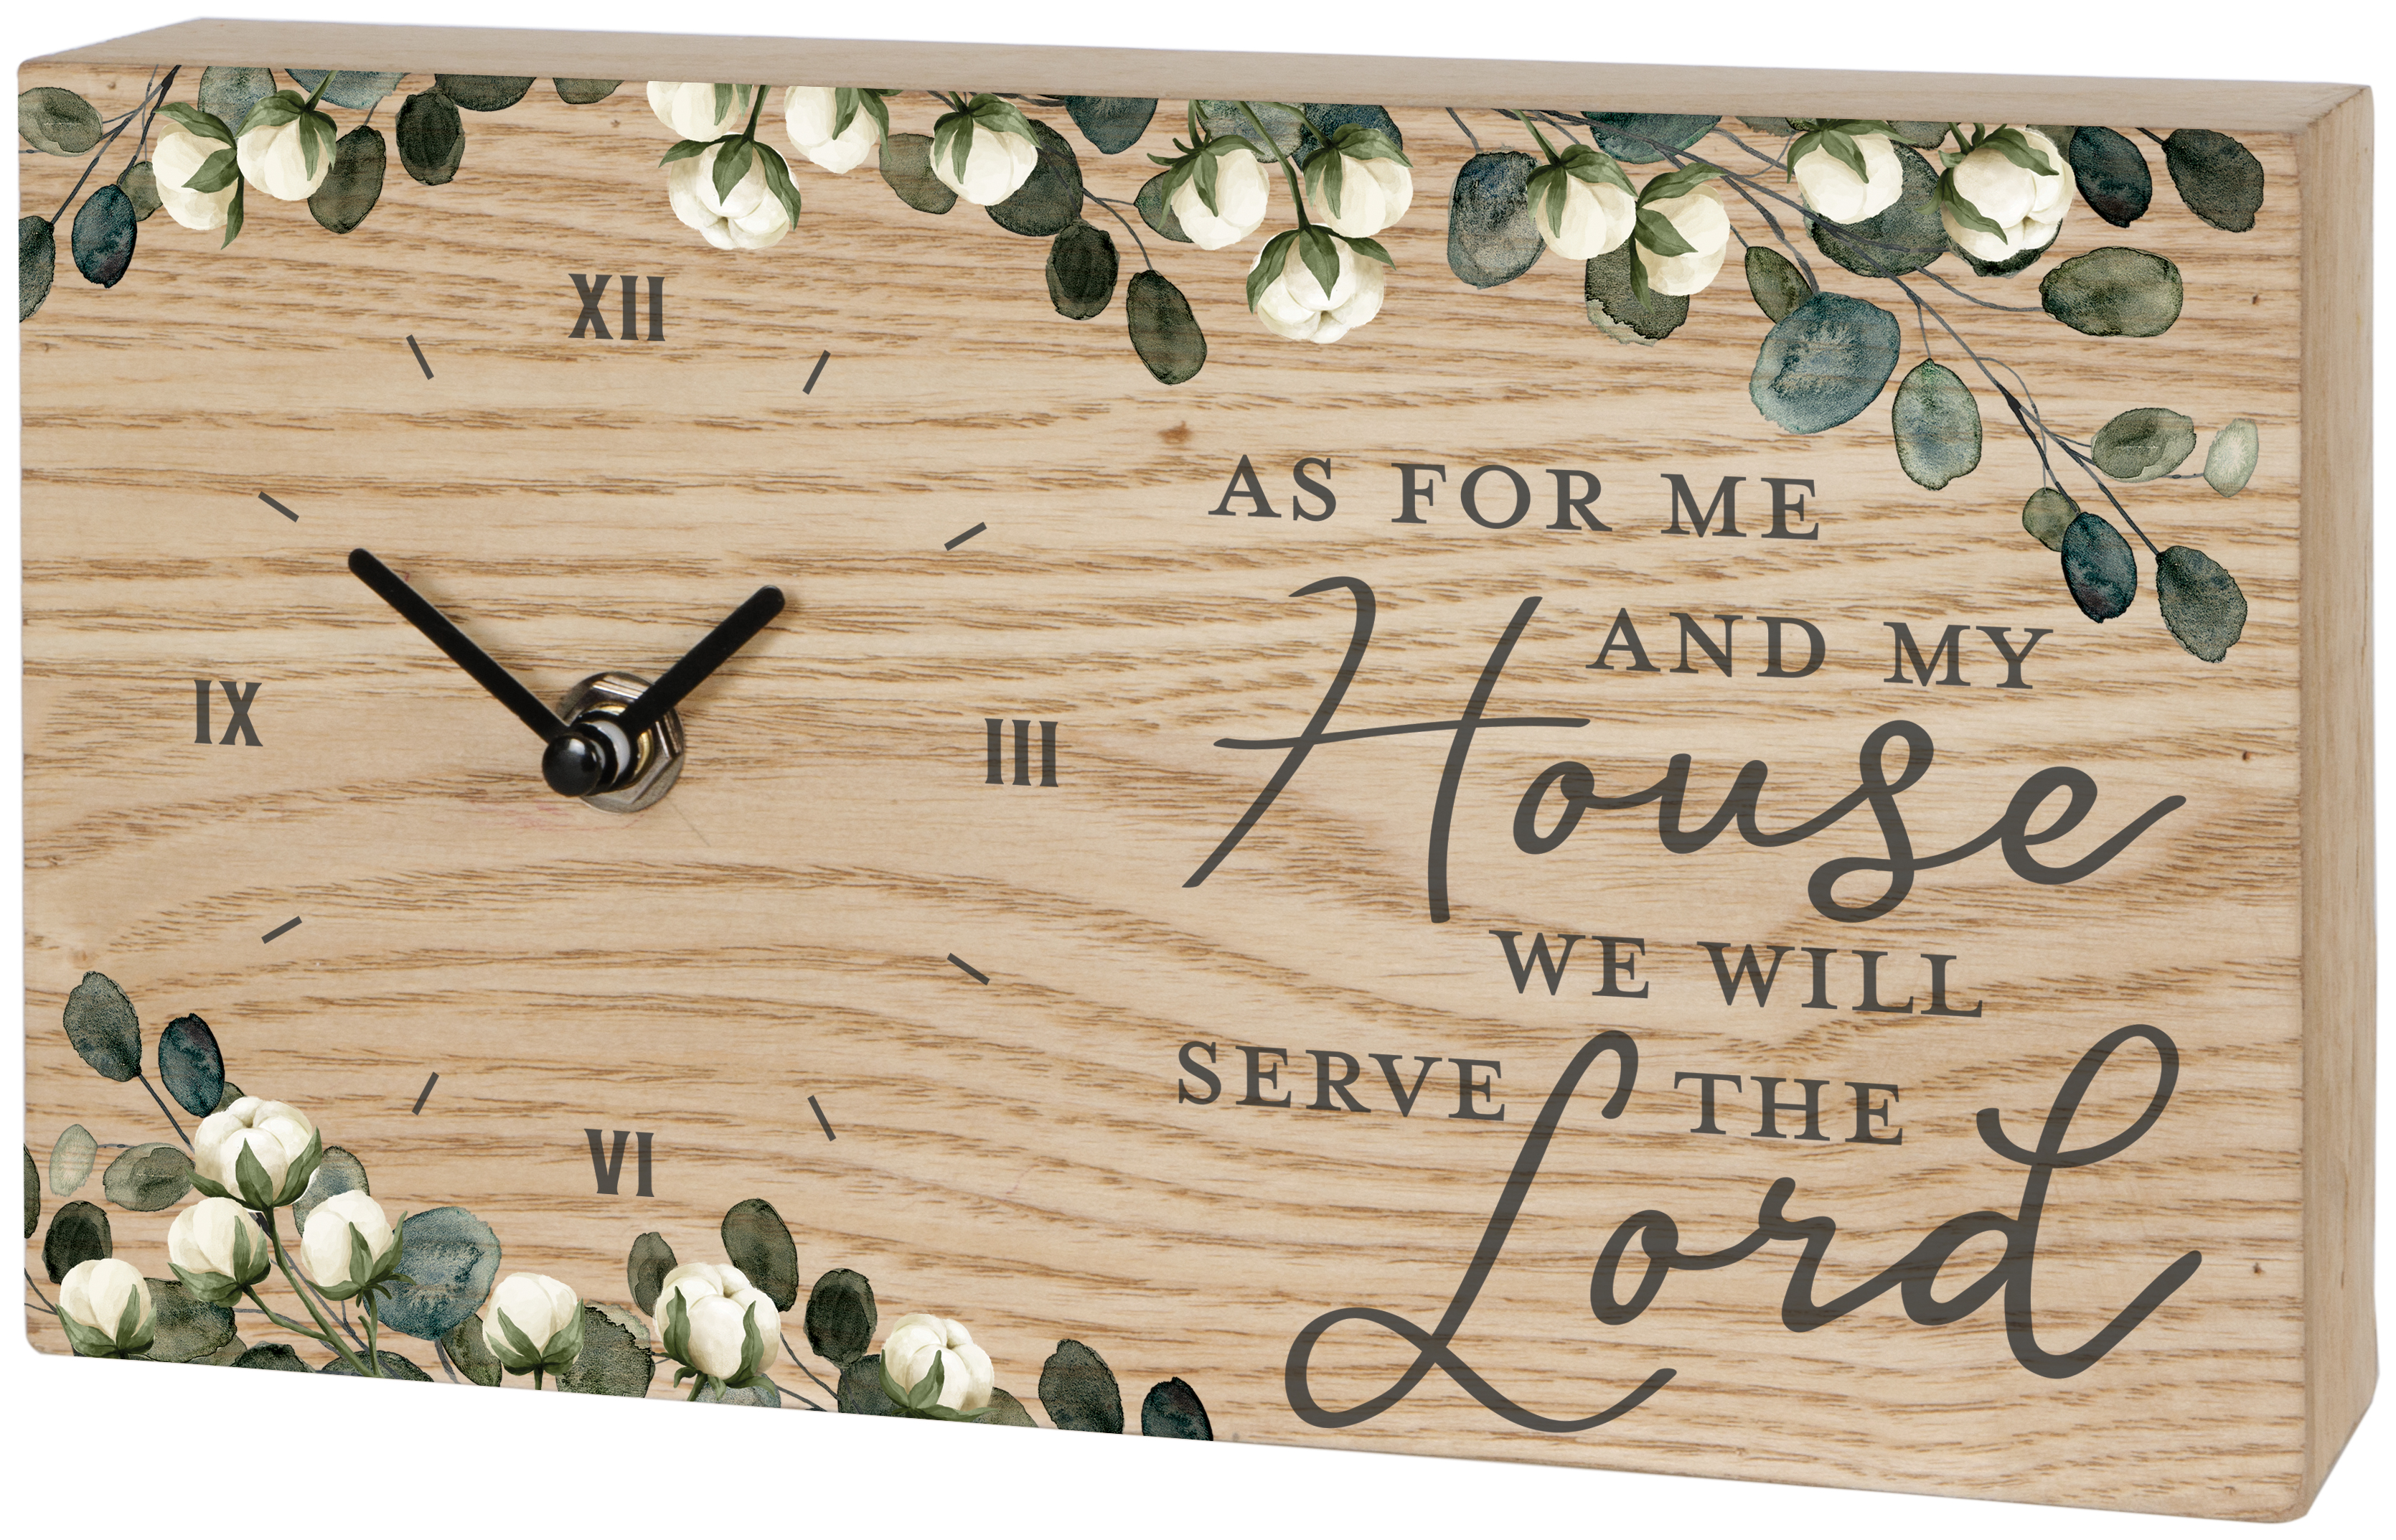 DESK CLOCK - IN THIS HOUSE, WE SERVE THE LORD 